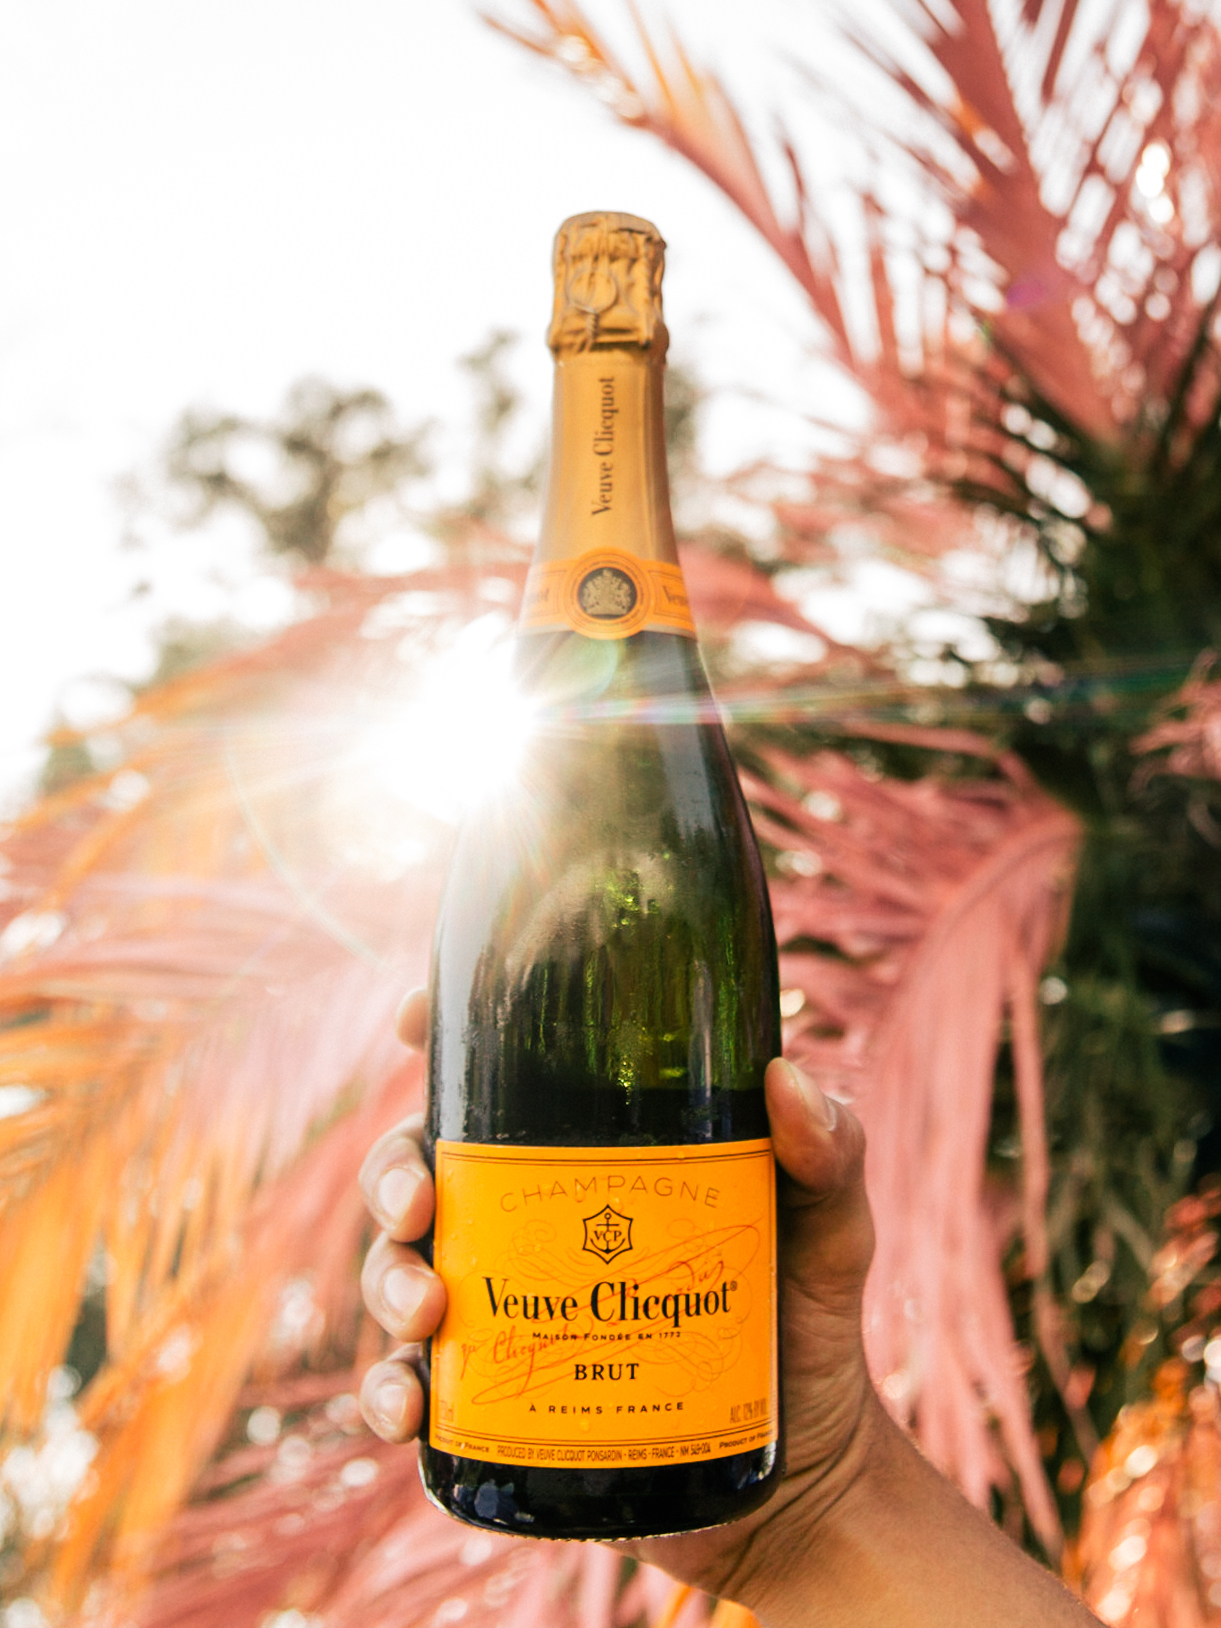 Veuve Clicquot Carnaval Returns To Miami For A Week-Long Series Of Events